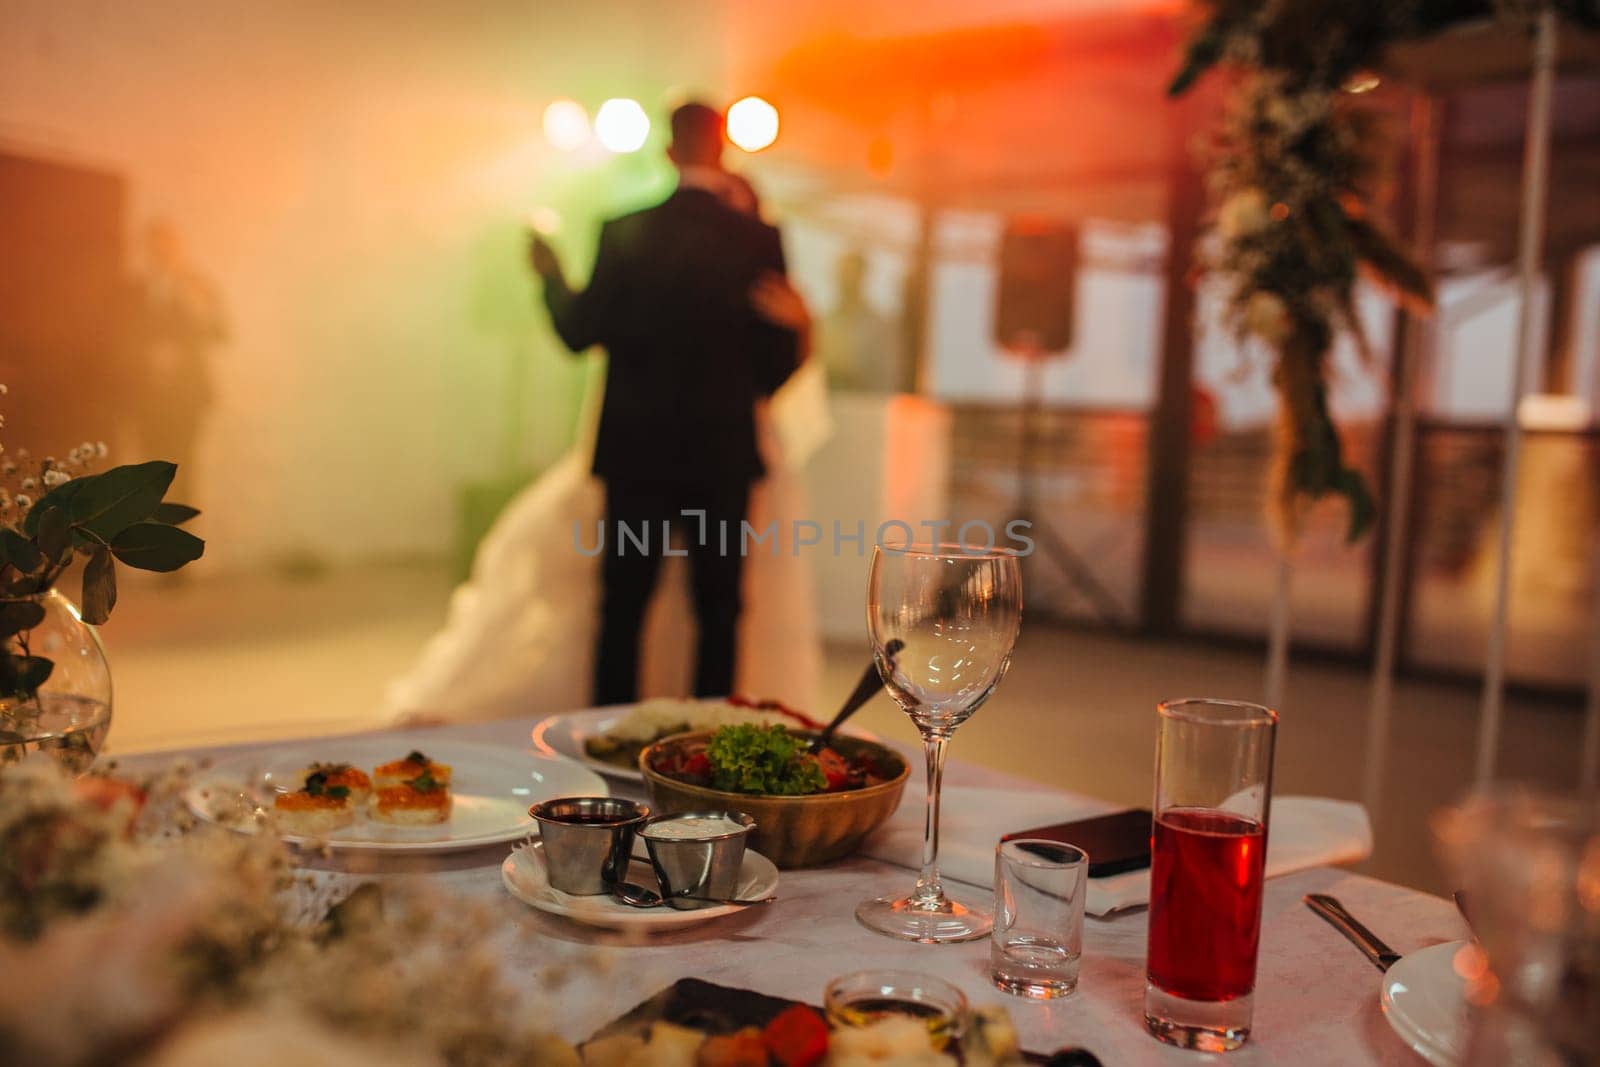 Selective focus on the wedding table with drinks and food in the background newlyweds dancing the first dance.